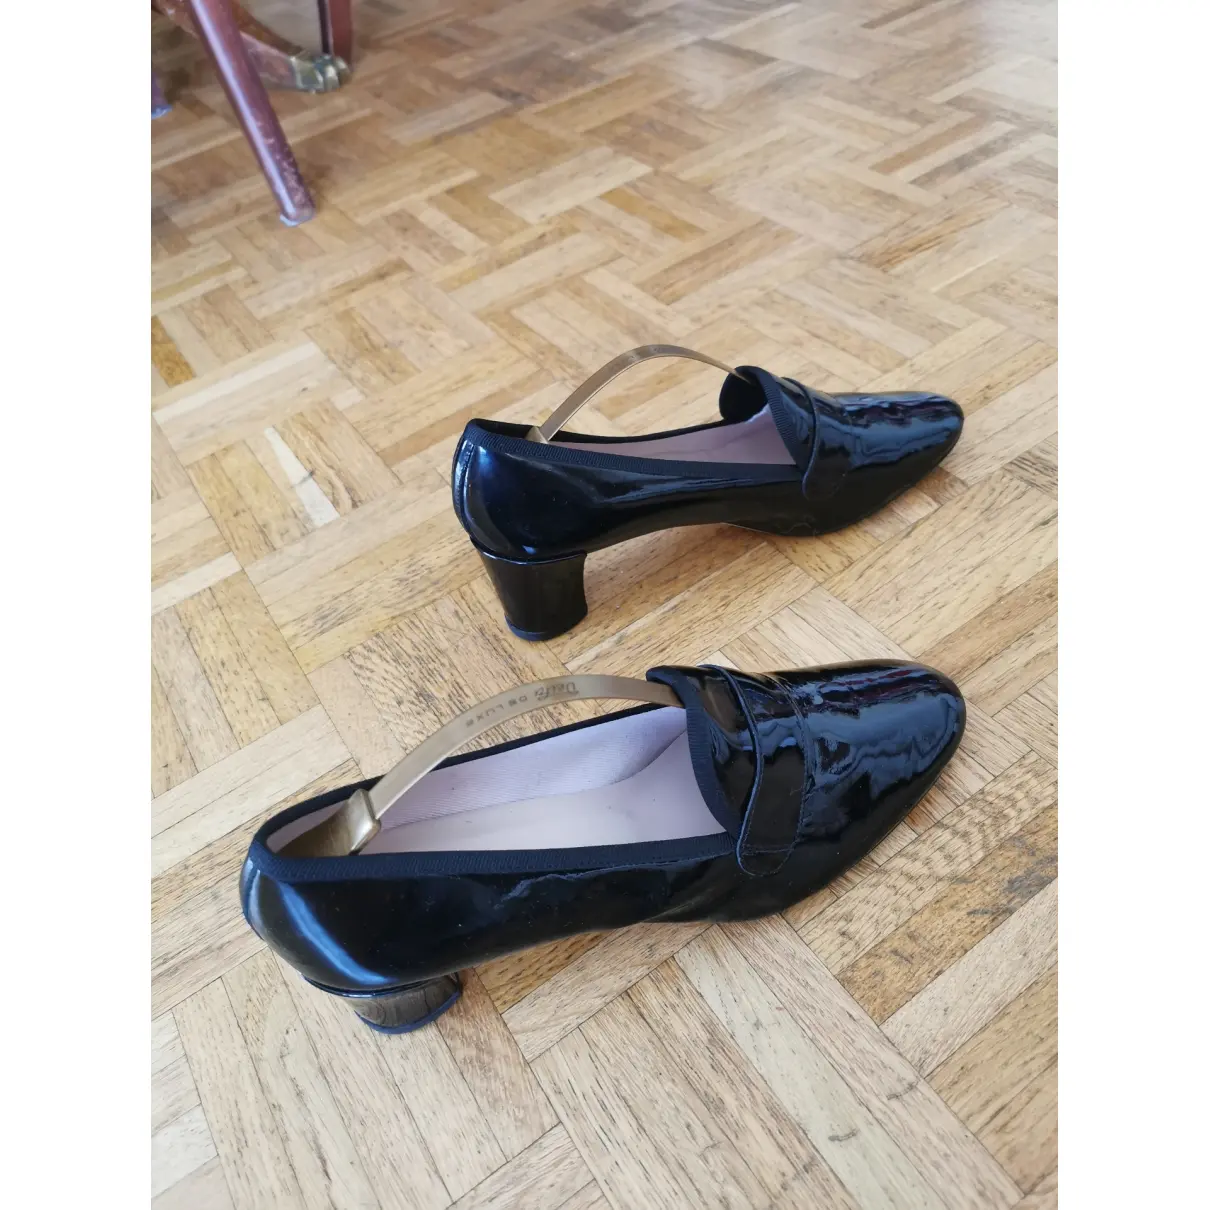 Buy Repetto Patent leather flats online